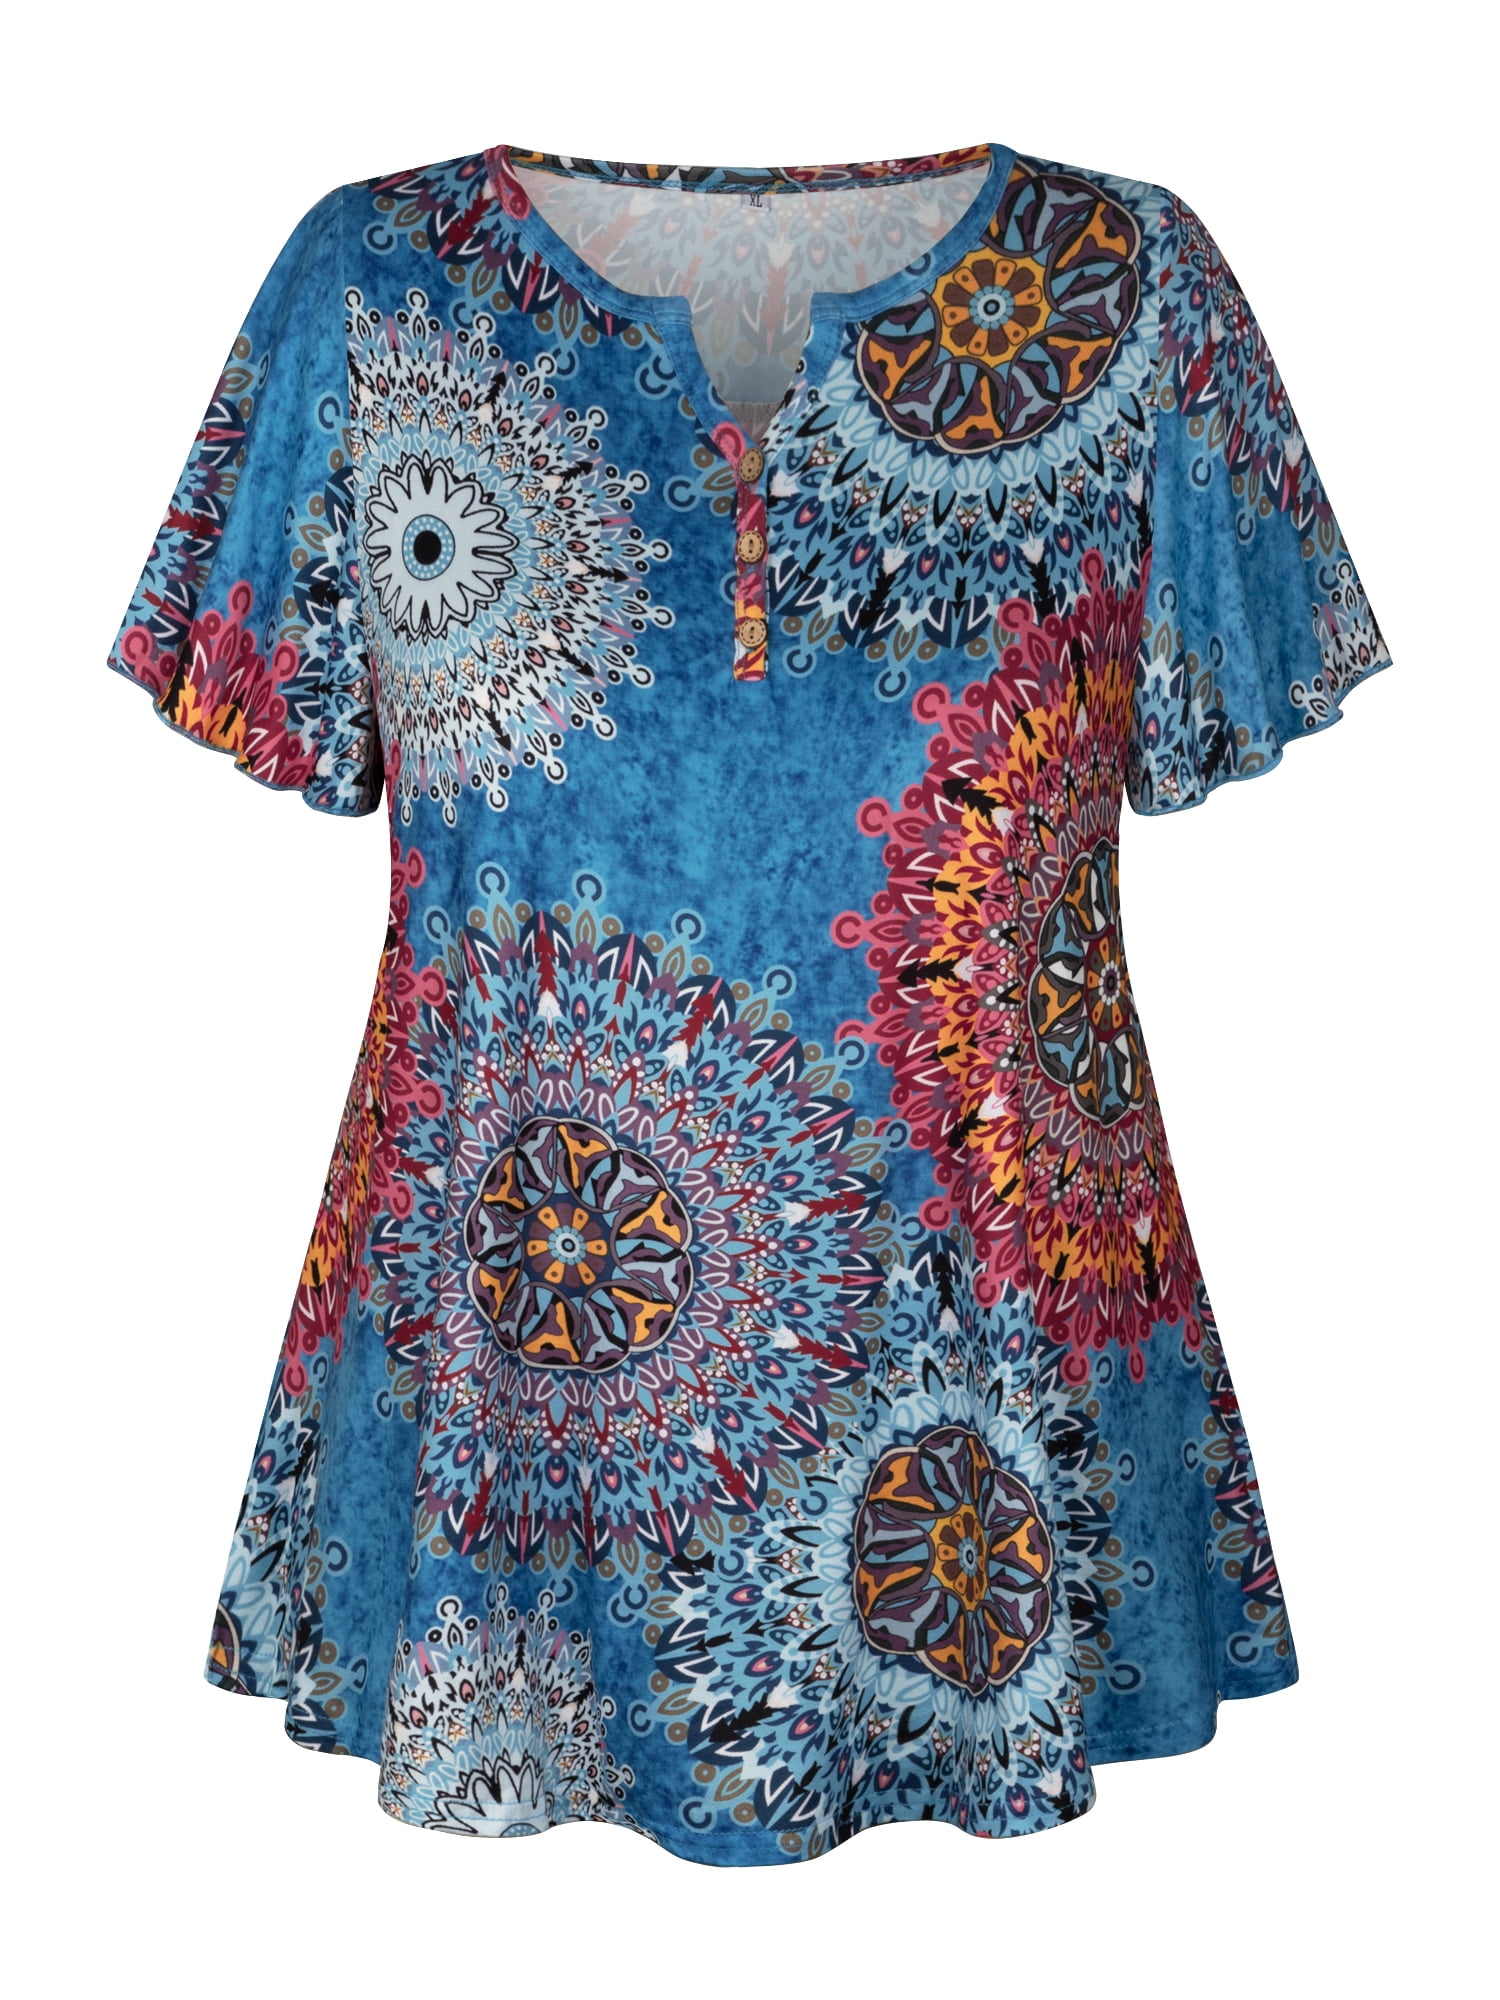 Chama Short Sleeve T Shirt for Women Plus Size Flowy Tunic Tops